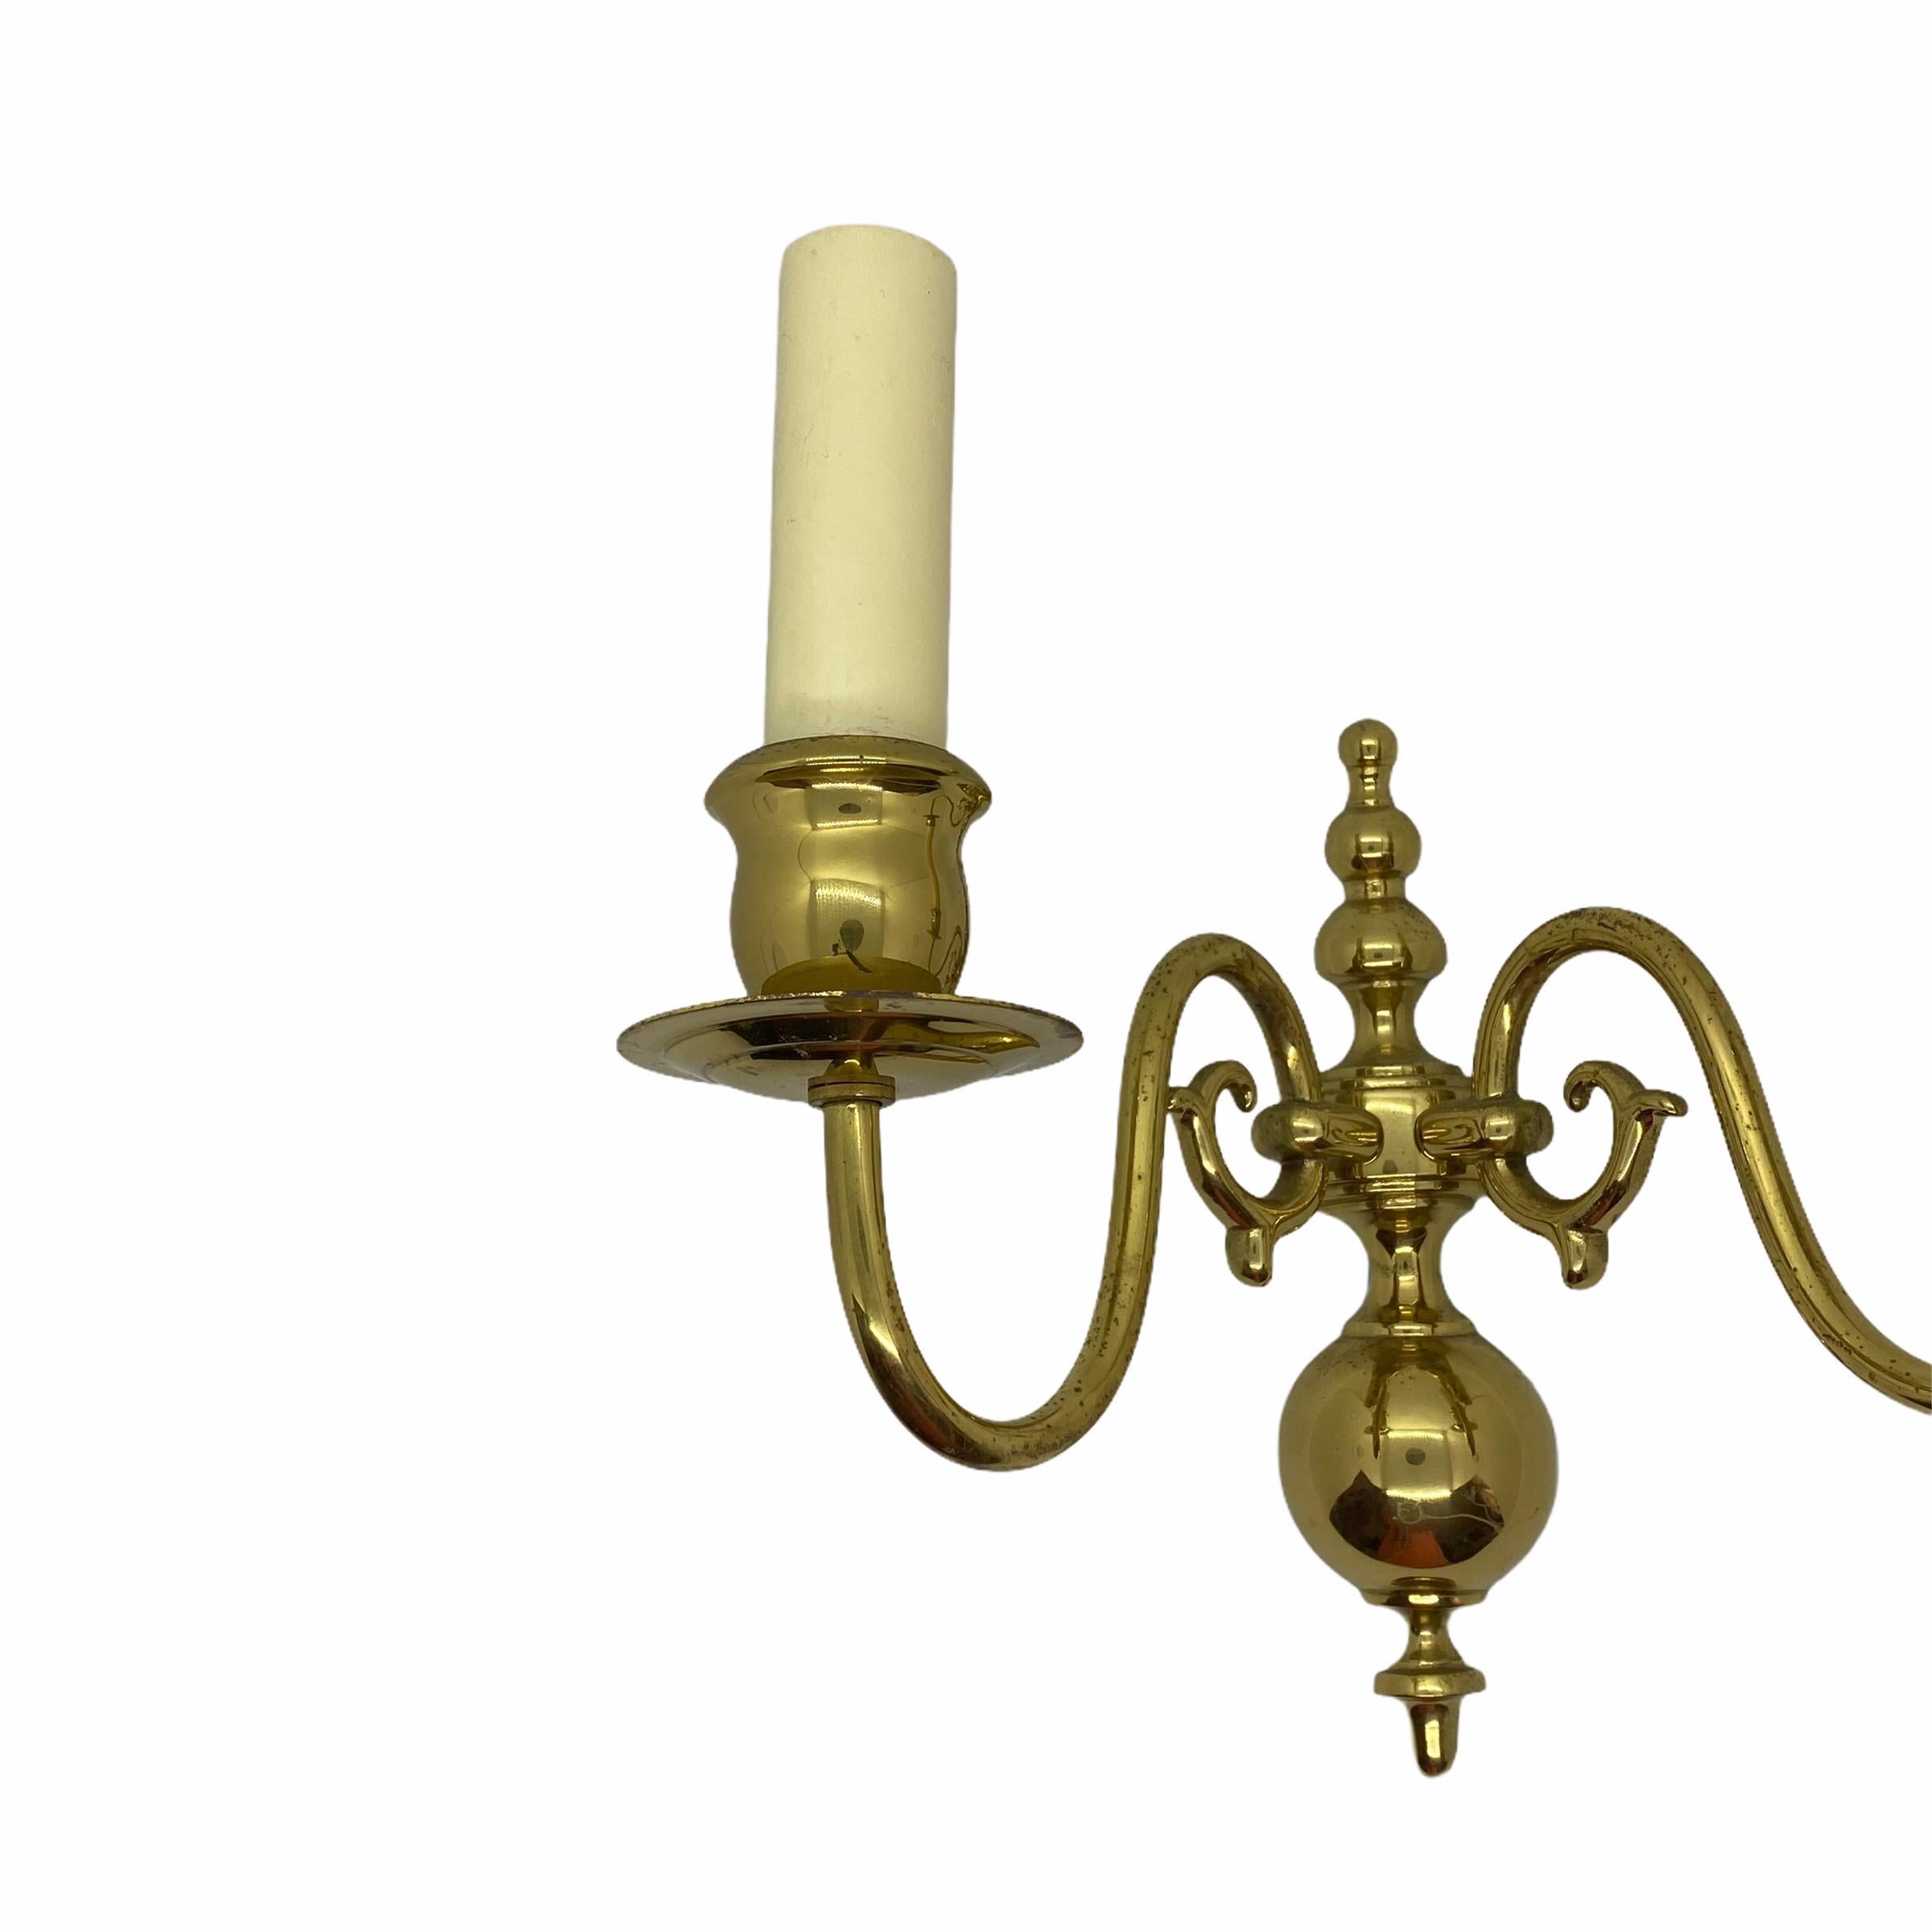 Metal Pair of Solid Brass Two-Light Wall Sconces, Vintage, German, 1960s For Sale